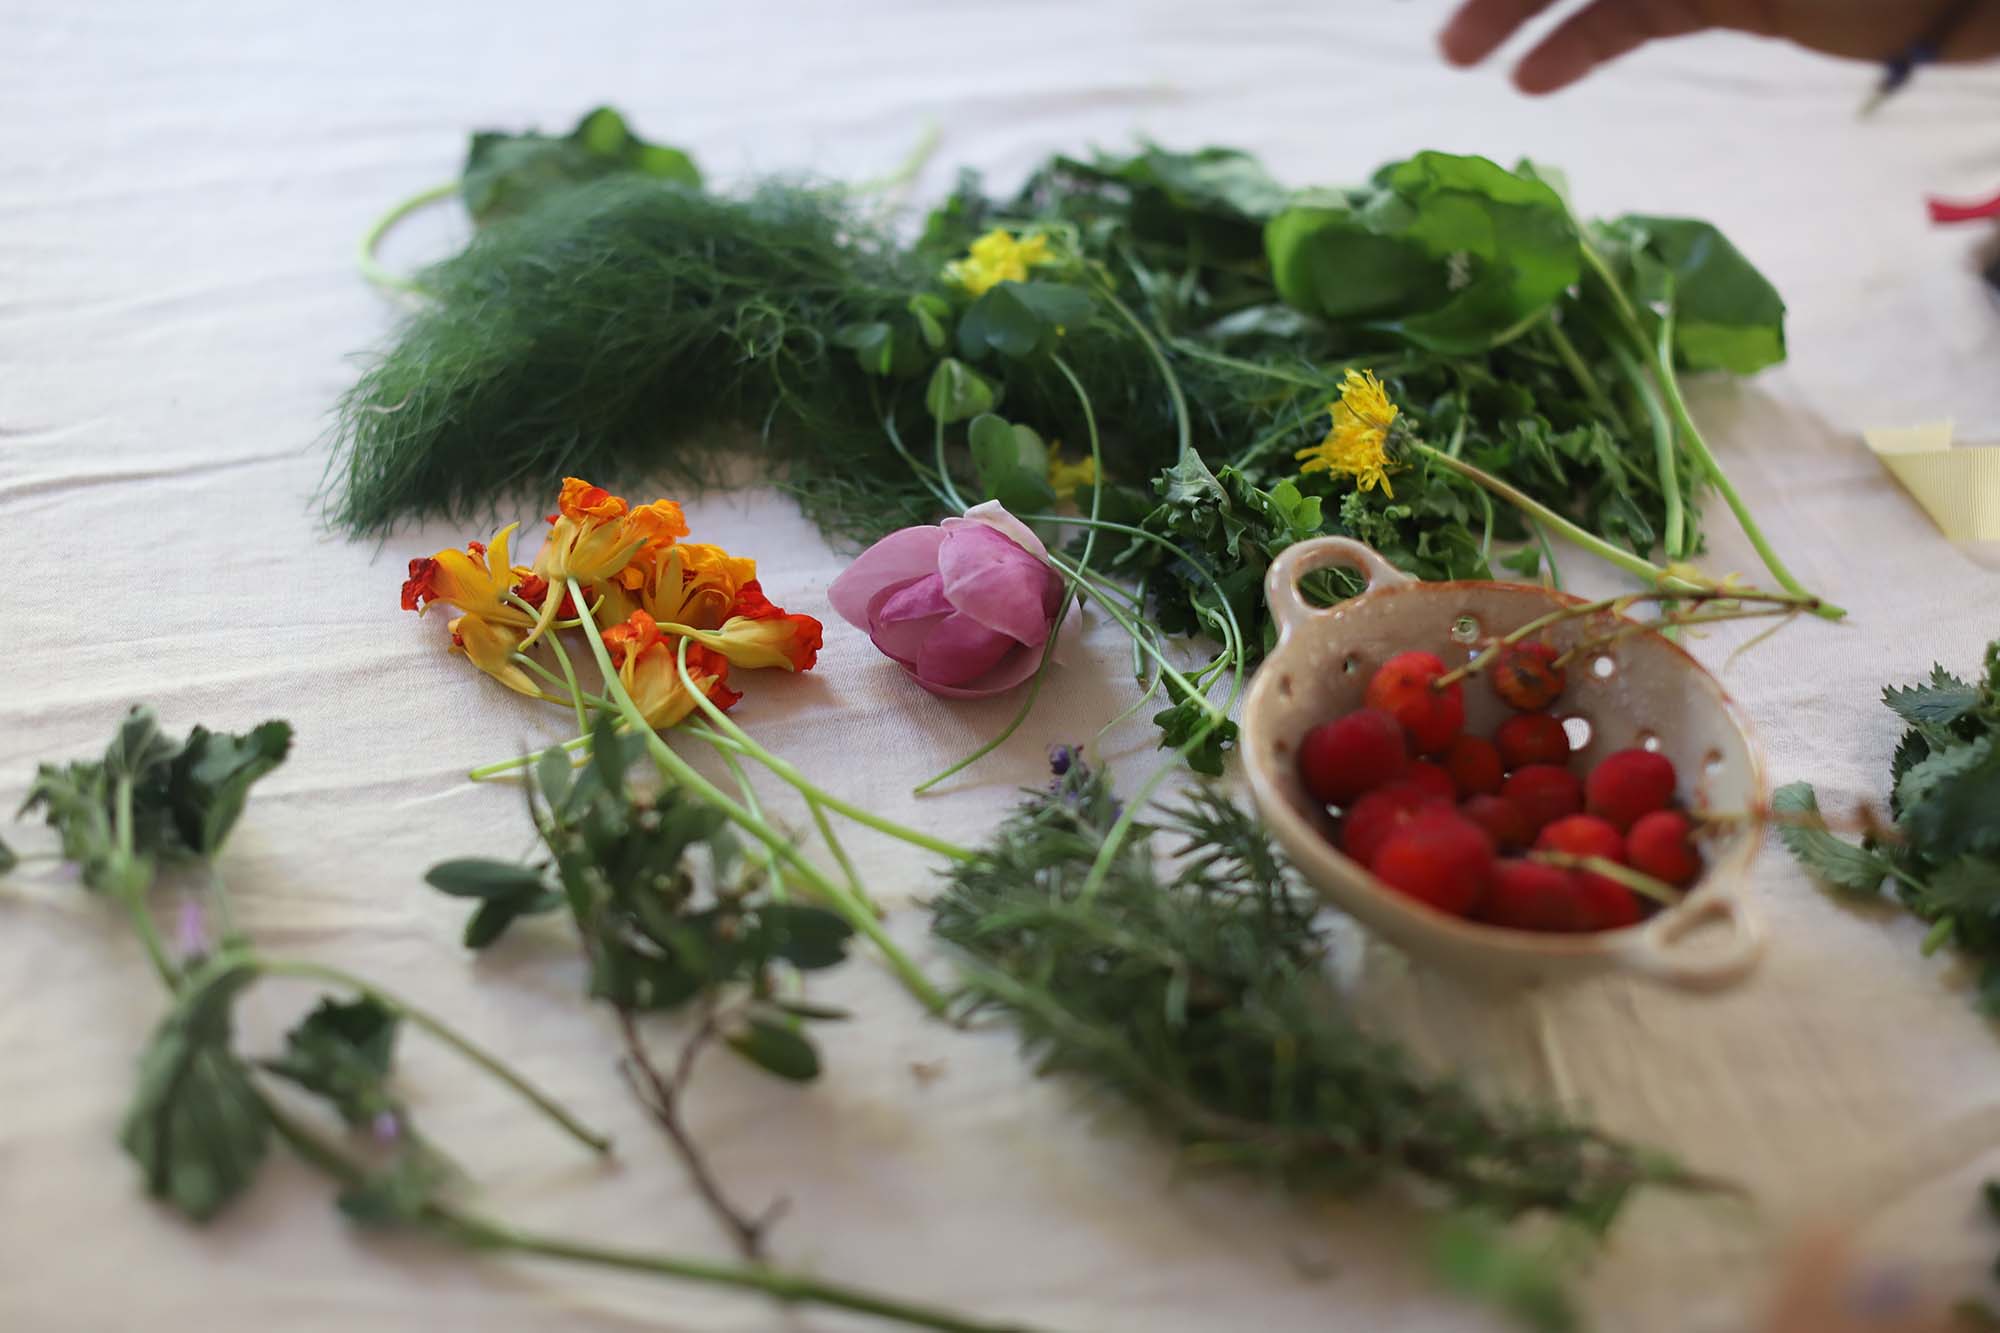 A colorful spread of edible plants and flowers, arranged on a white tablecloth.